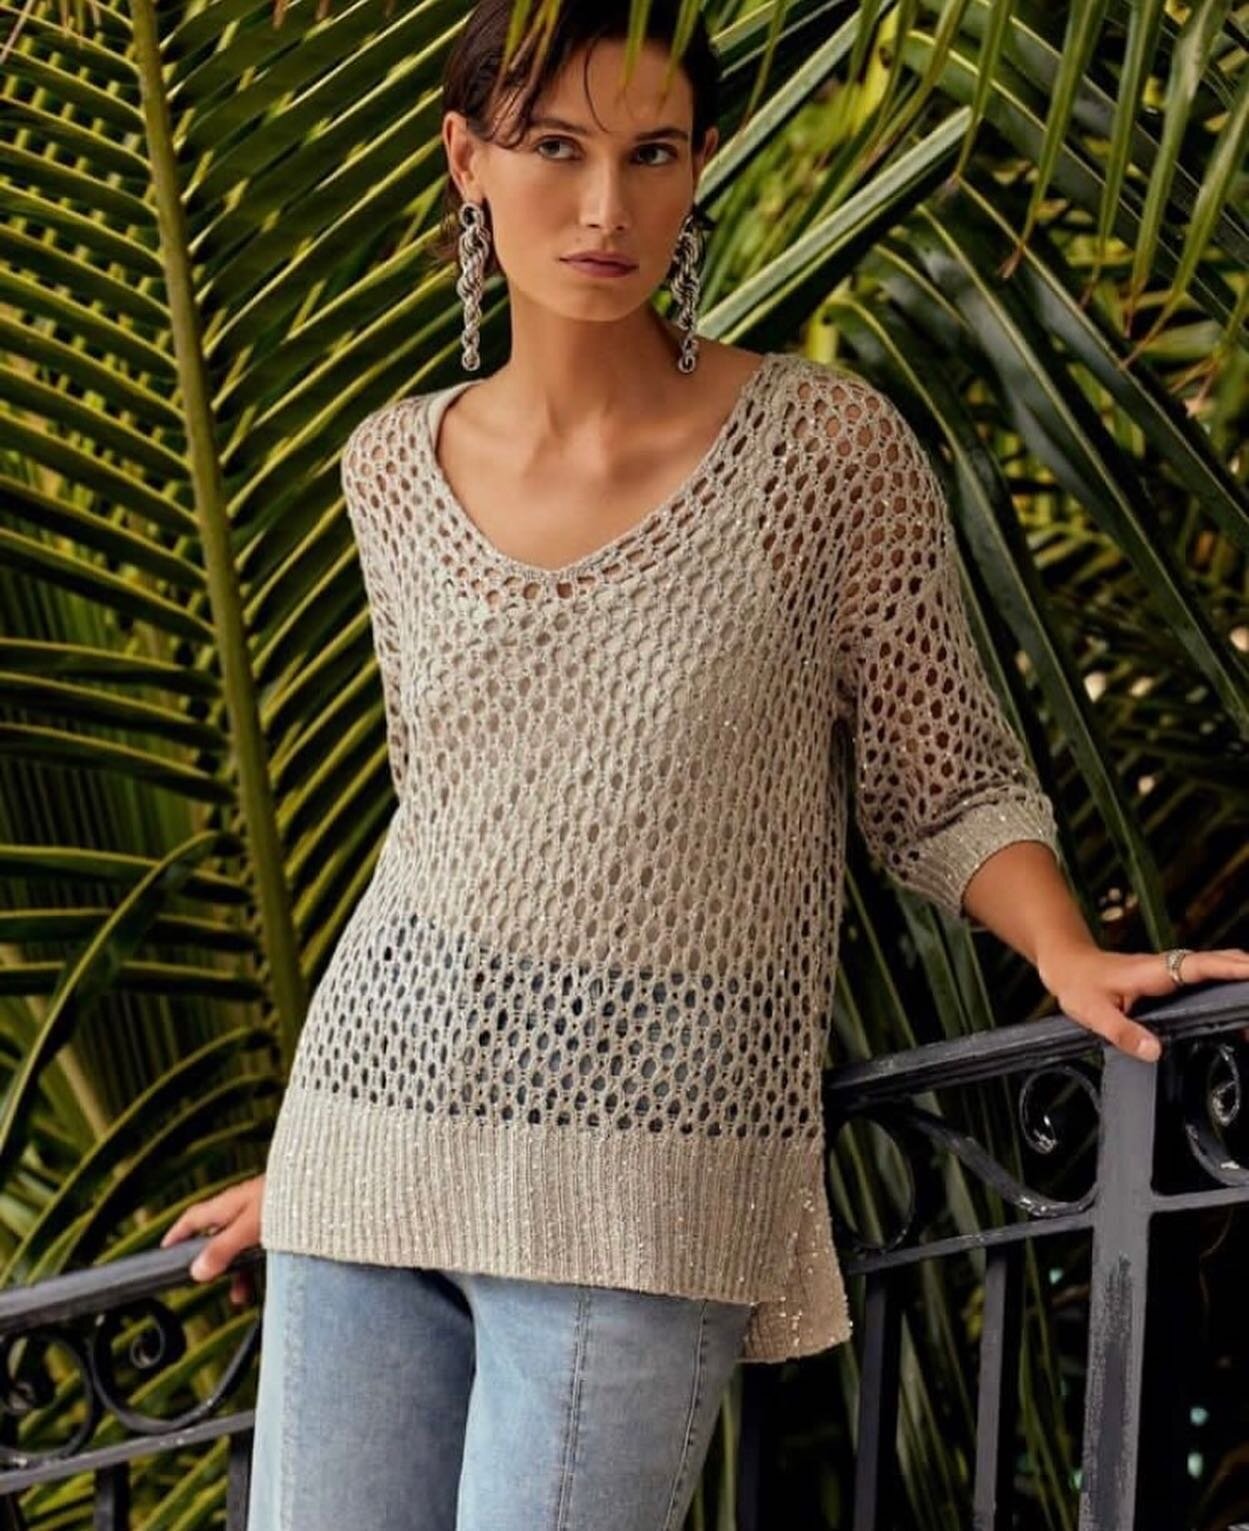 Add a touch of sparkle to your wardrobe with @josephribkoff ✨ This beautiful acrylic blend knit sweater featuring mini sequins and an open stitch look will elevate any look ⭐️

This stylish and elegant top has a relaxed fit with drop shoulders, three